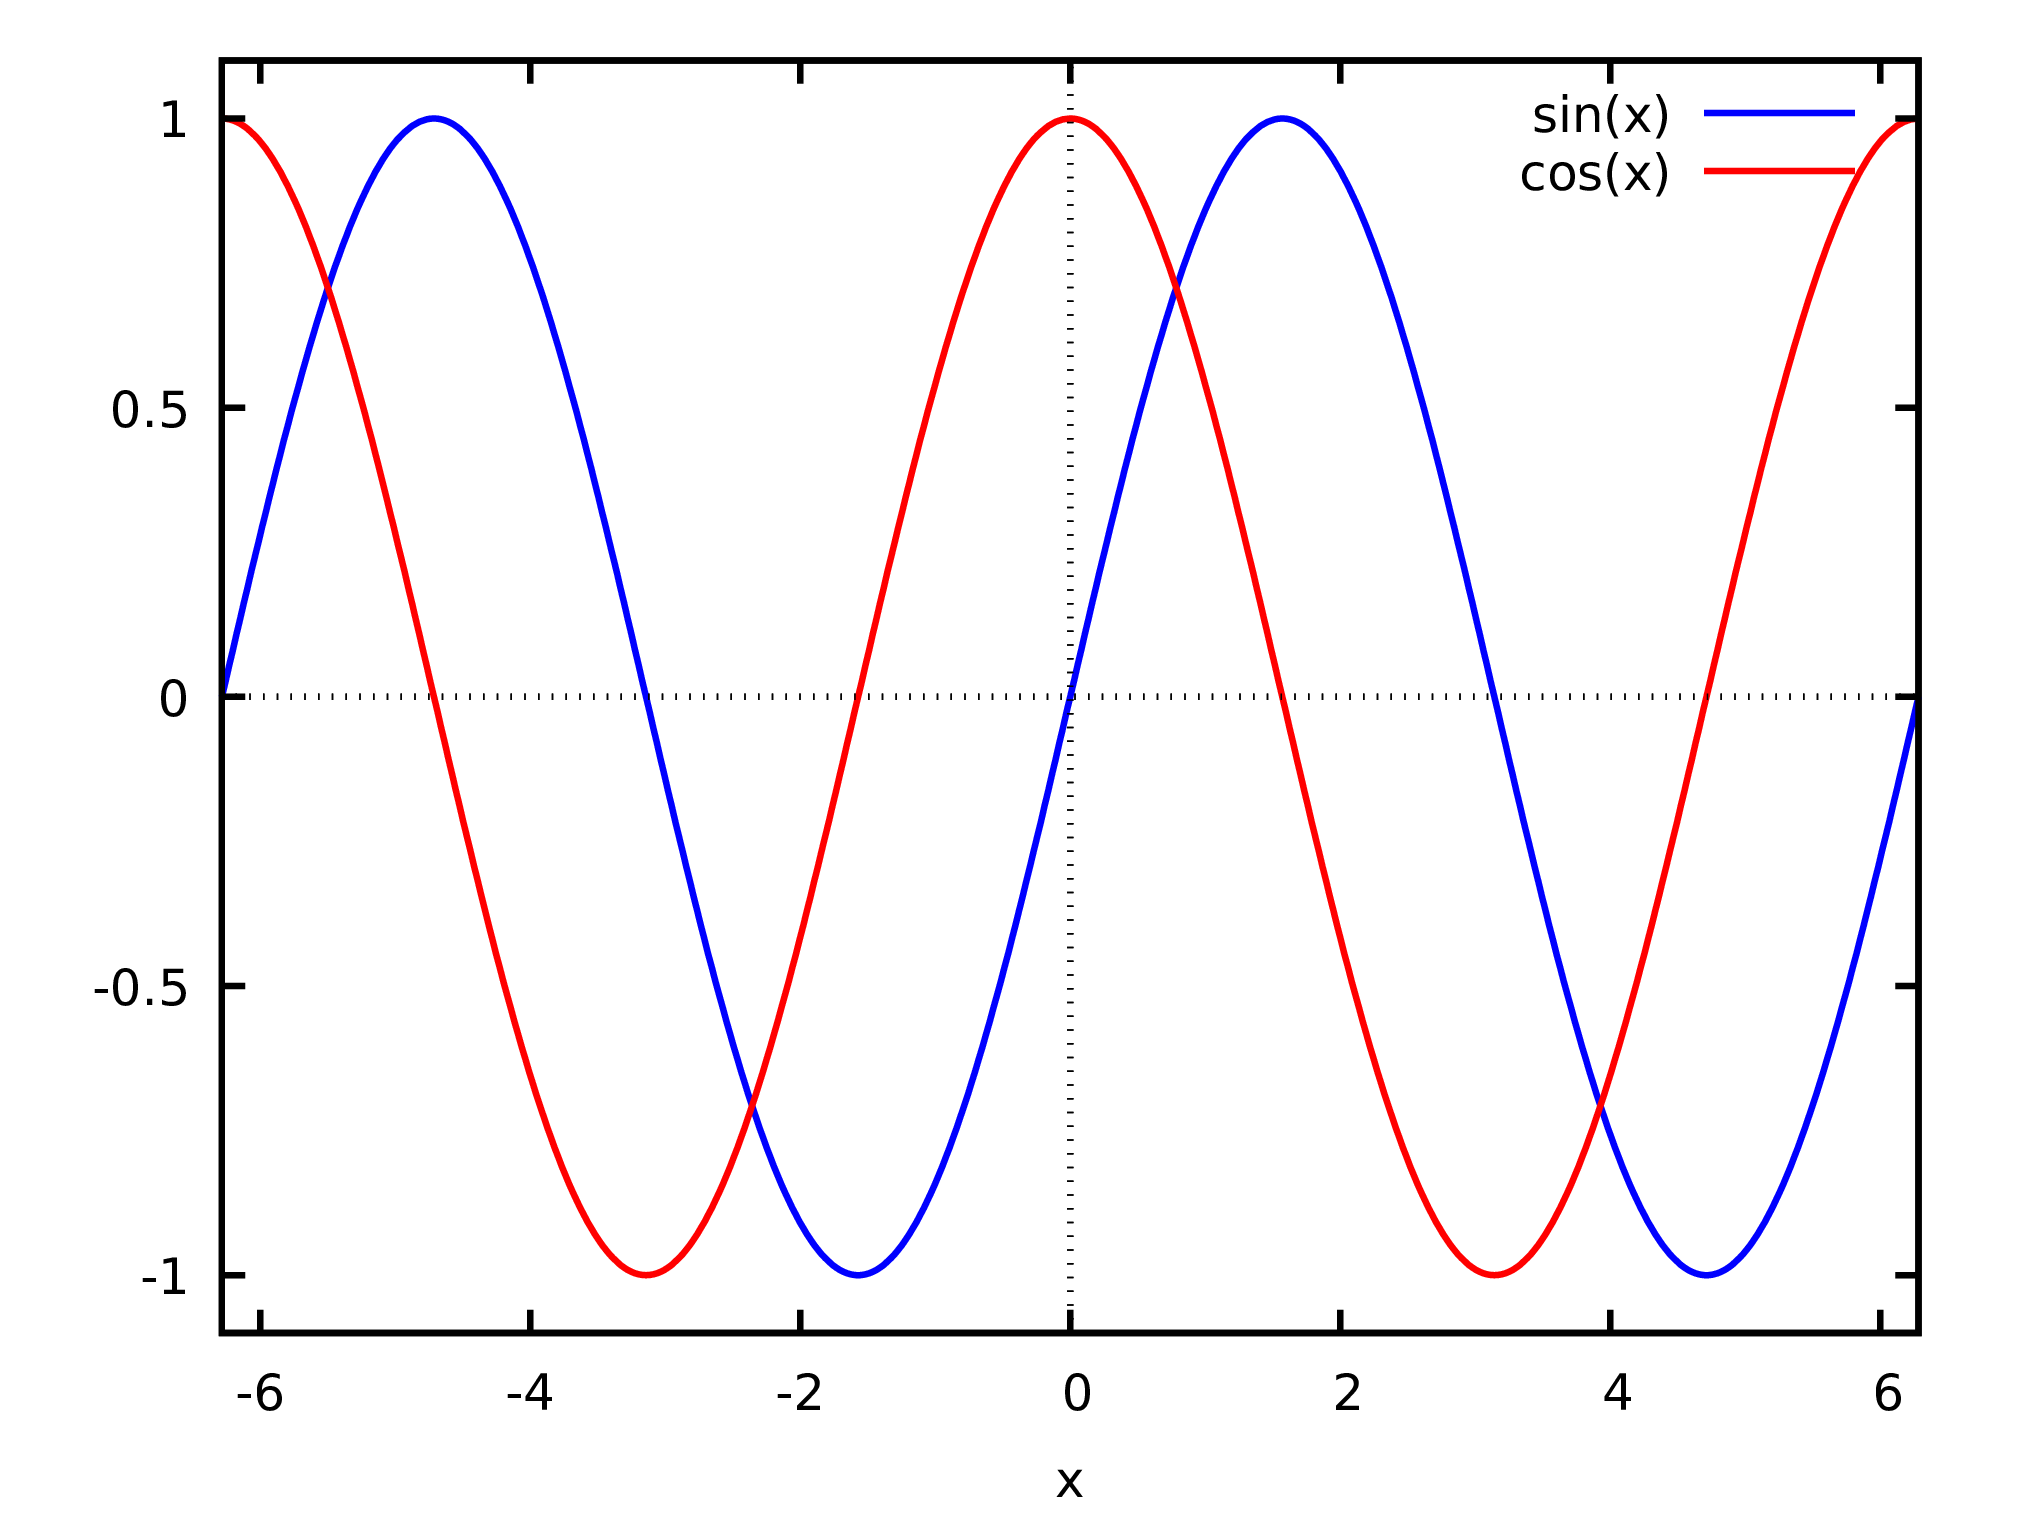 Plot of functions sin and cosine.